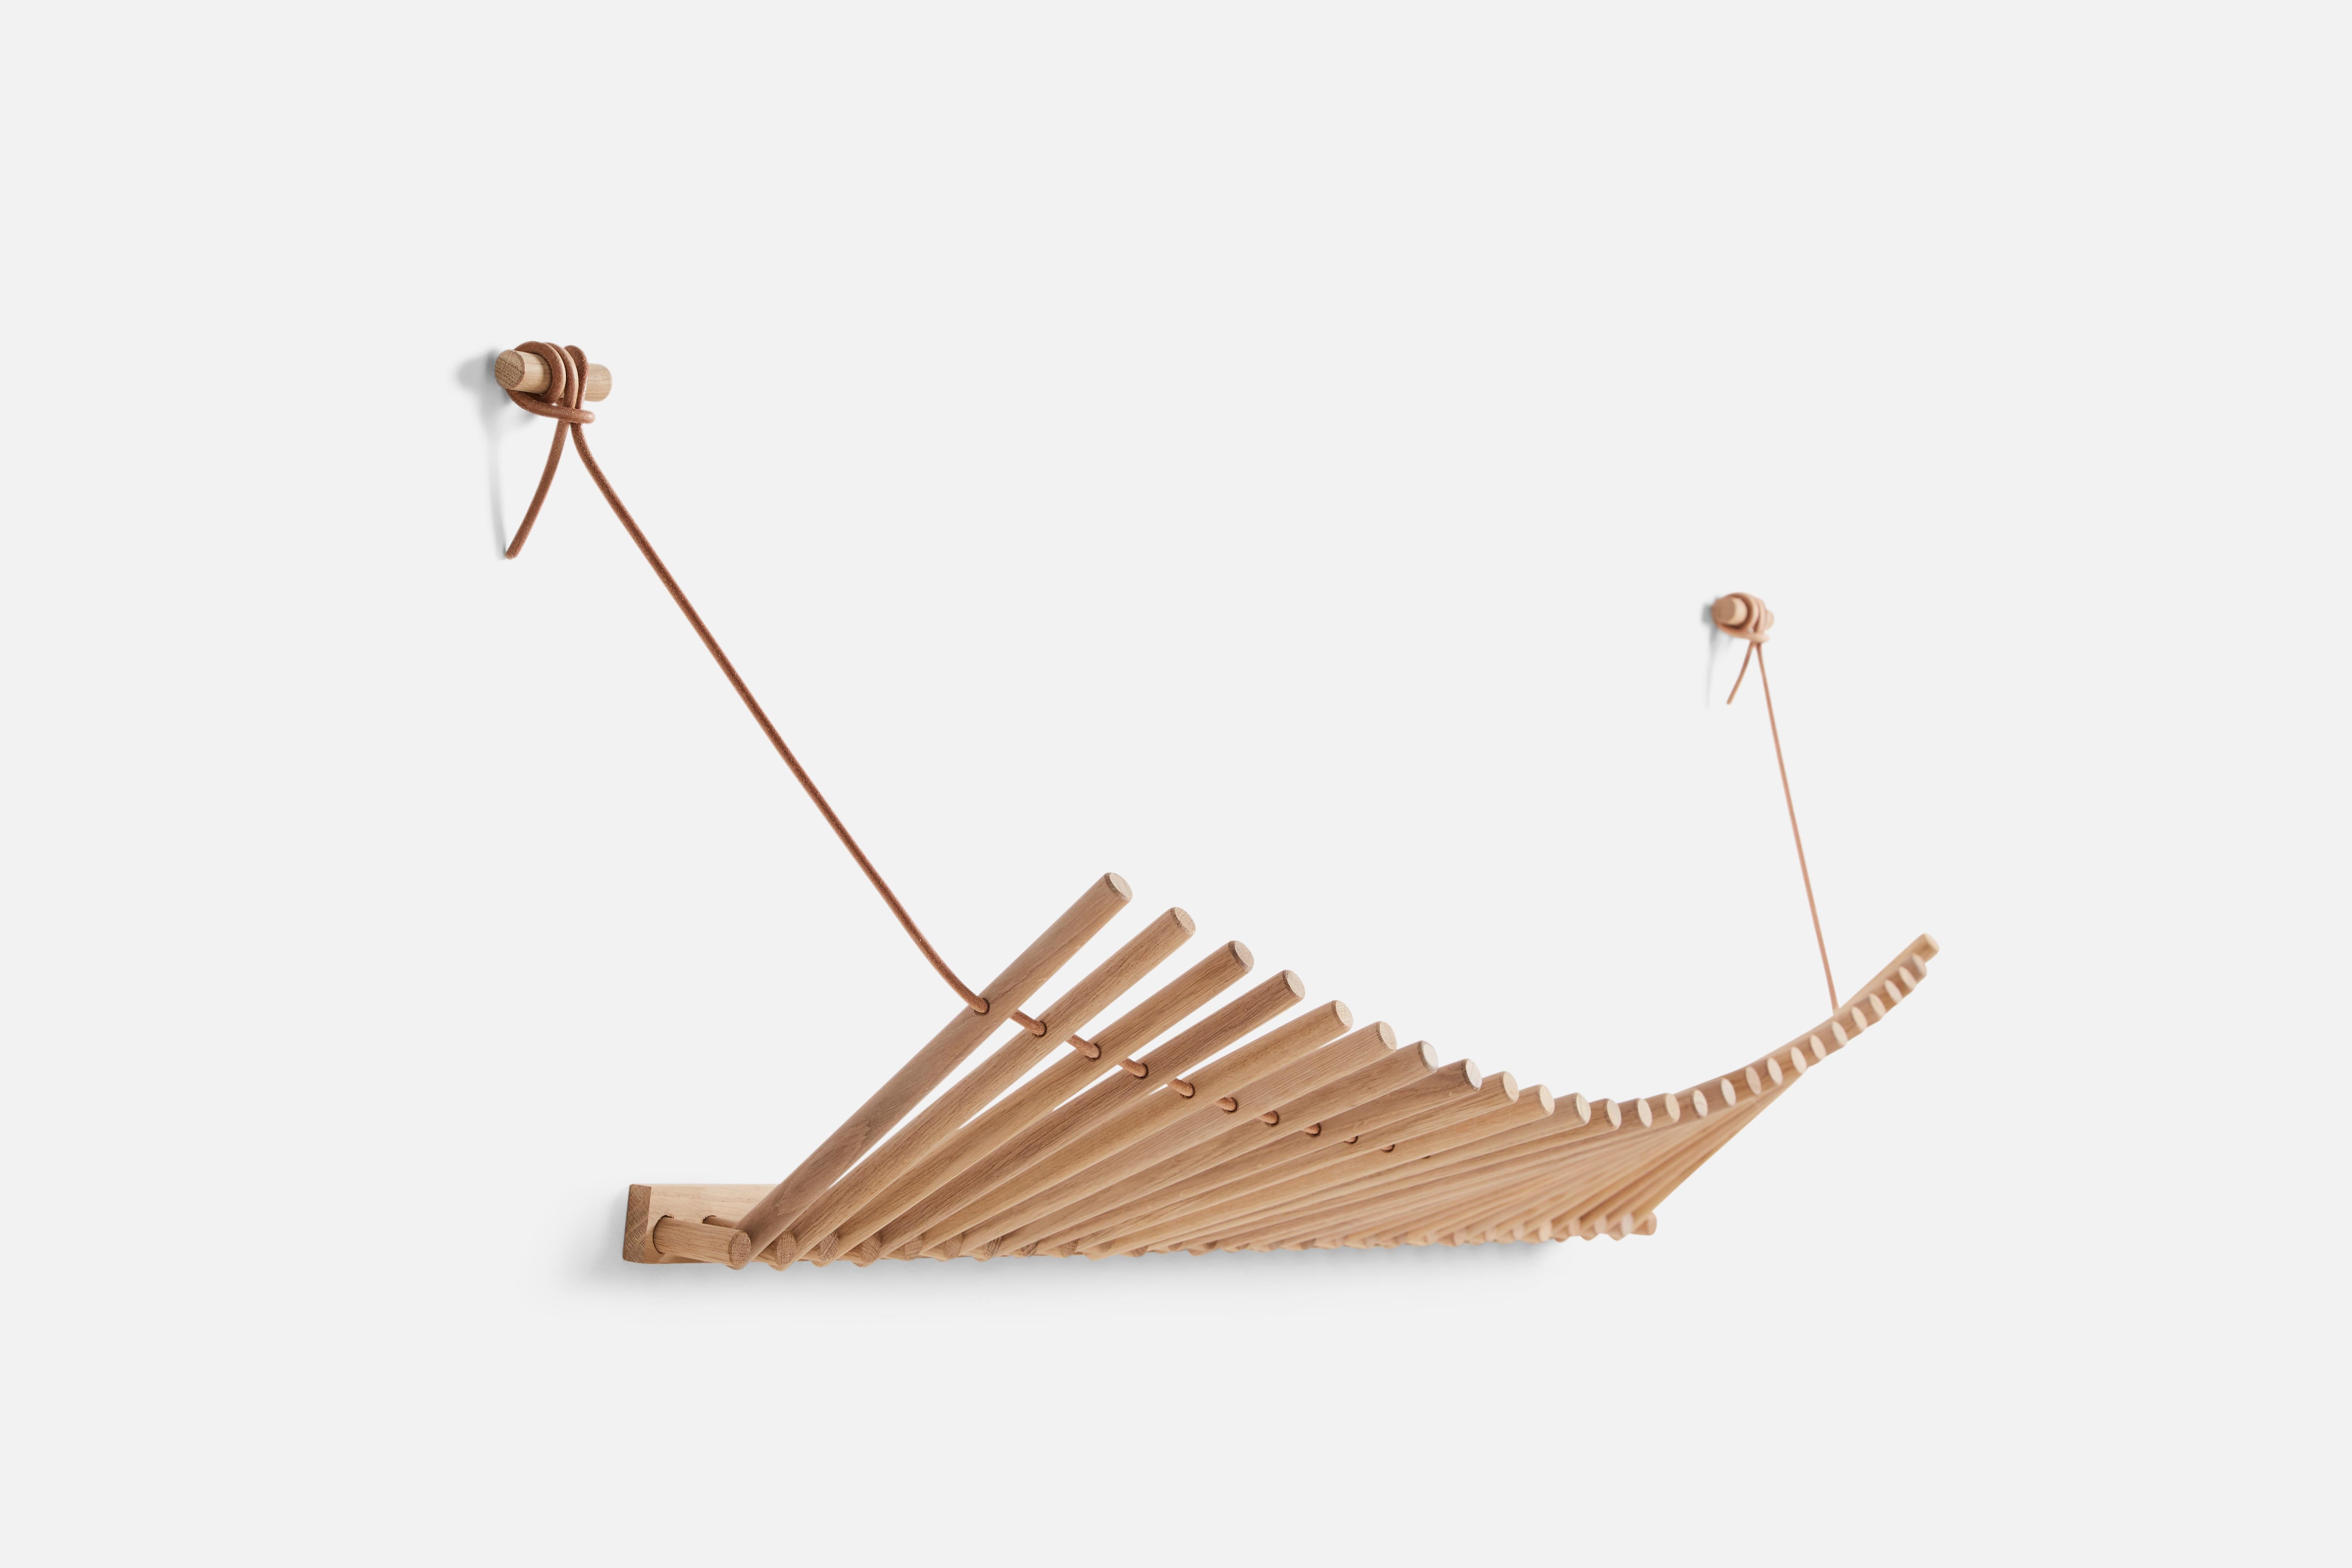 Oak Knaegt coat rack by Rikke Palmerston.
Materials: Oak, leather.
Dimensions: D 28.5 x W 87.5 x H 3.5 cm.
Available in oak or black oak.

Rikke Palmerston is a talented up-and-coming designer born in Denmark. A young designer focusing on